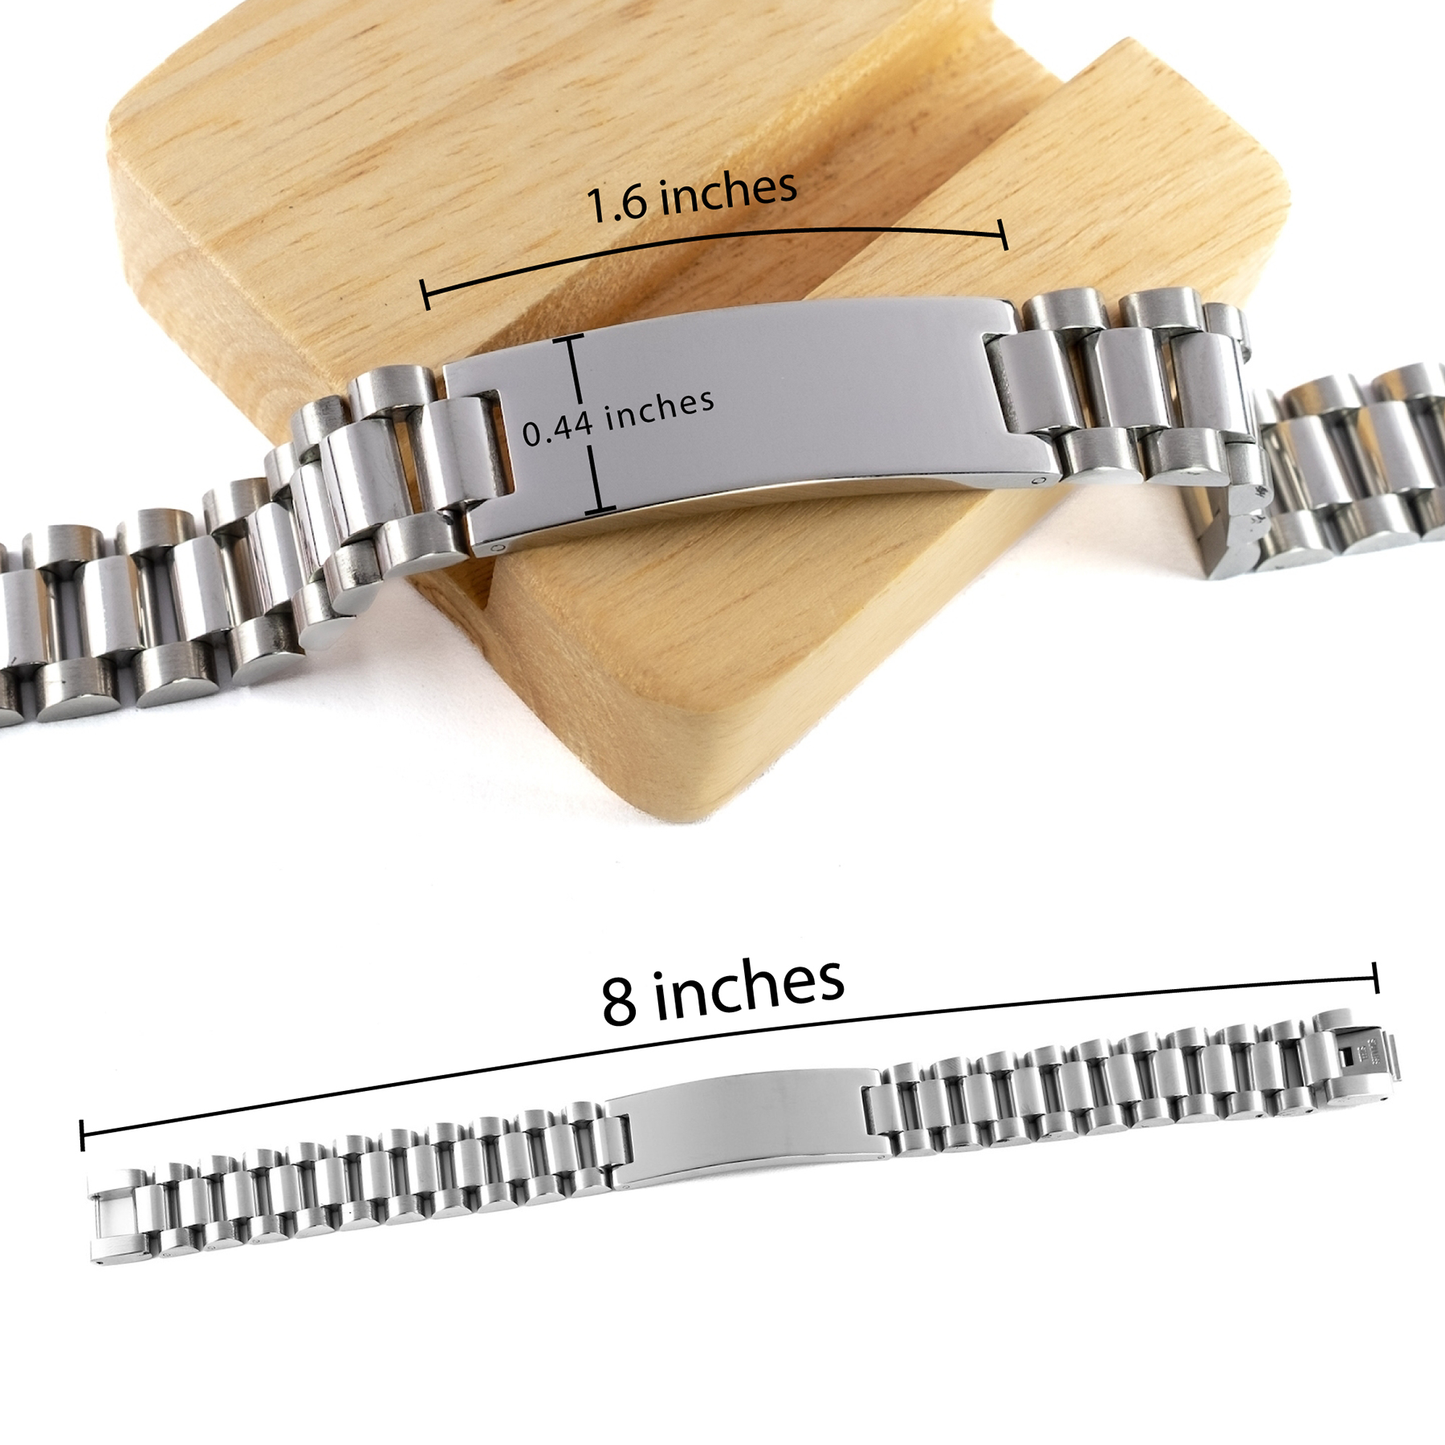 Nephew Motivational Gifts from Auntie, Remember to never give up no matter what, Inspirational Birthday Ladder Stainless Steel Bracelet for Nephew